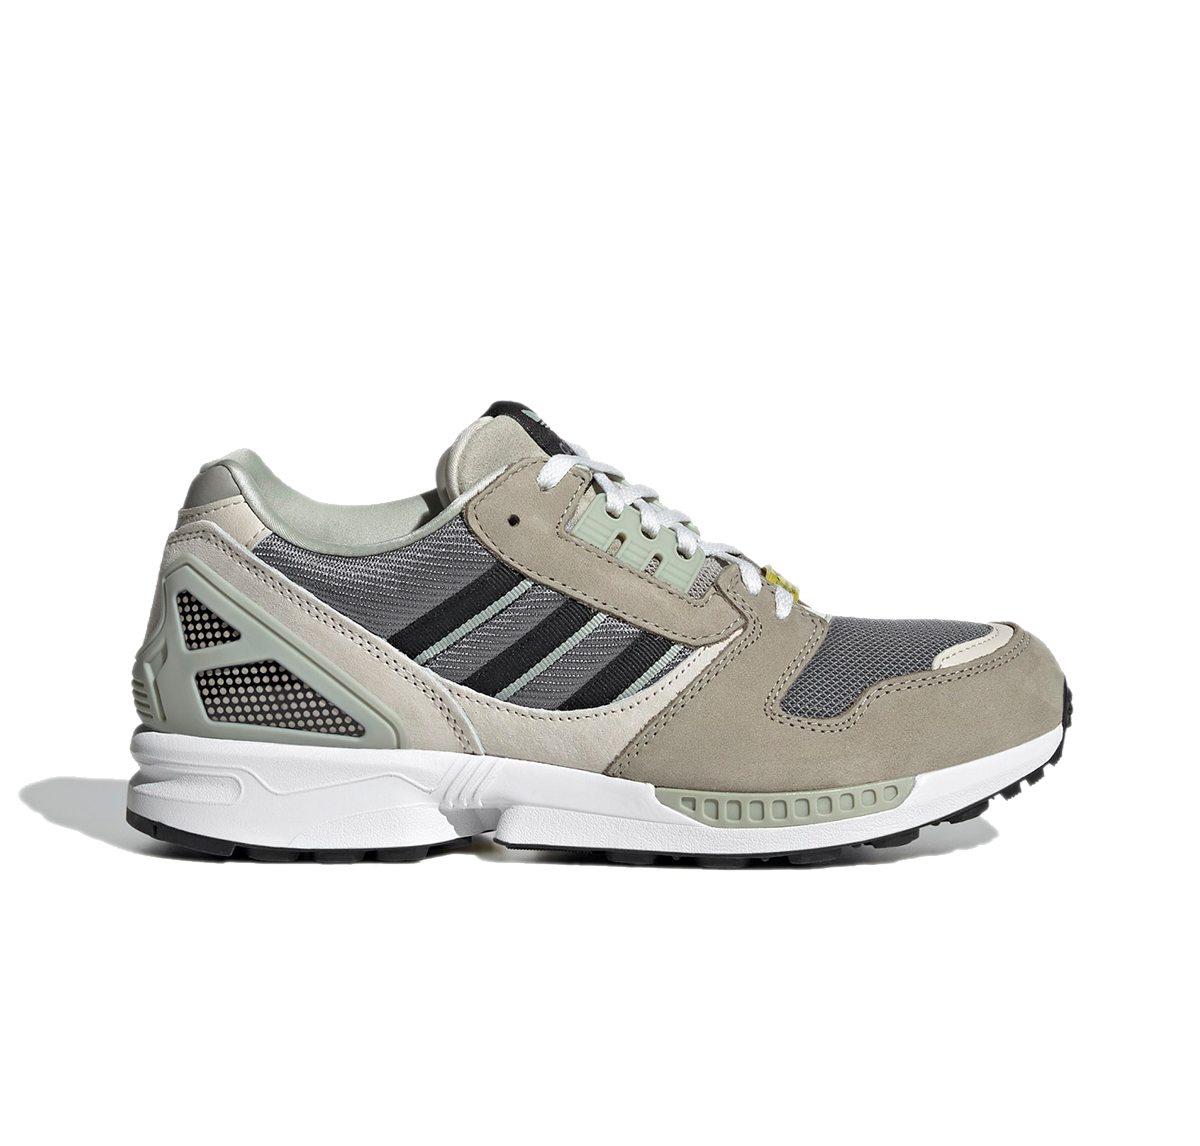 adidas Originals ZX 8000 - Feather Grey outside